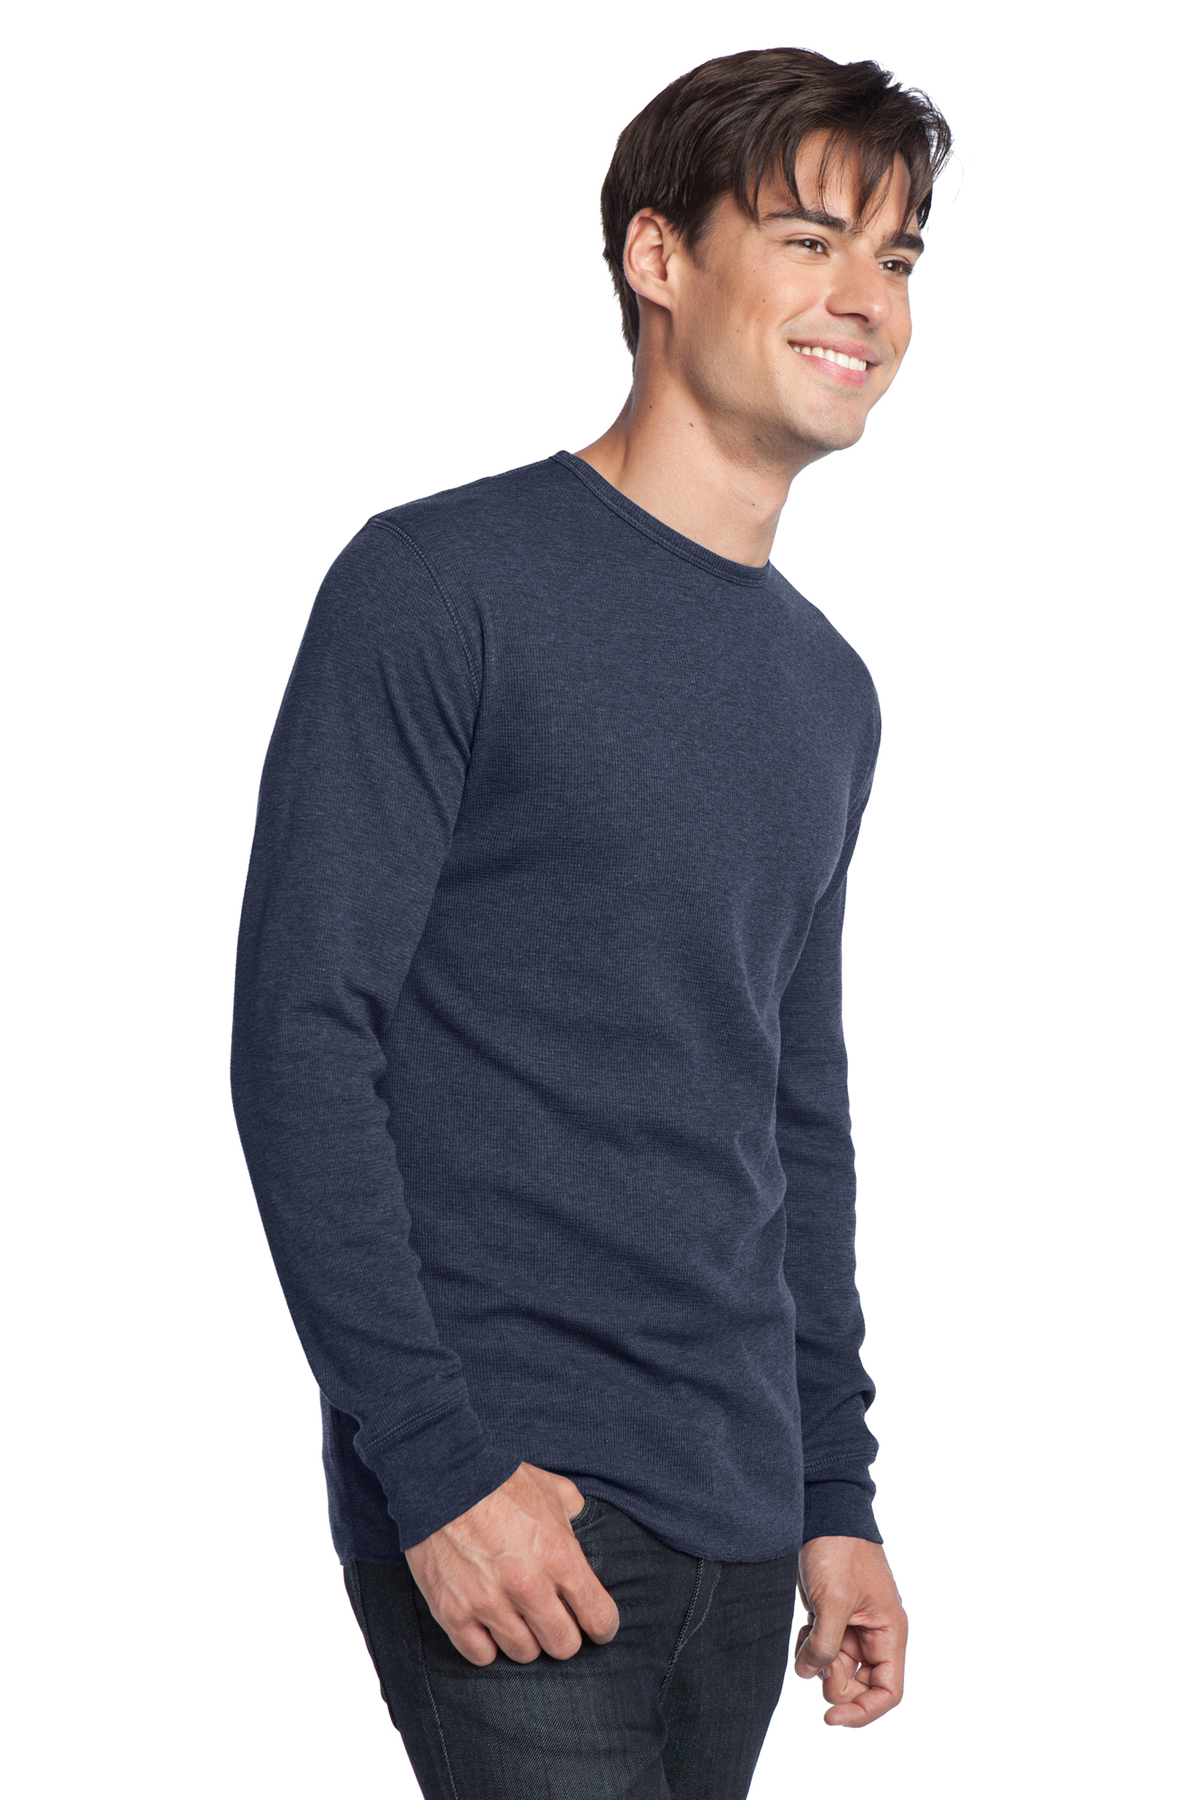 District - Young Mens Long Sleeve Thermal | Product | SanMar